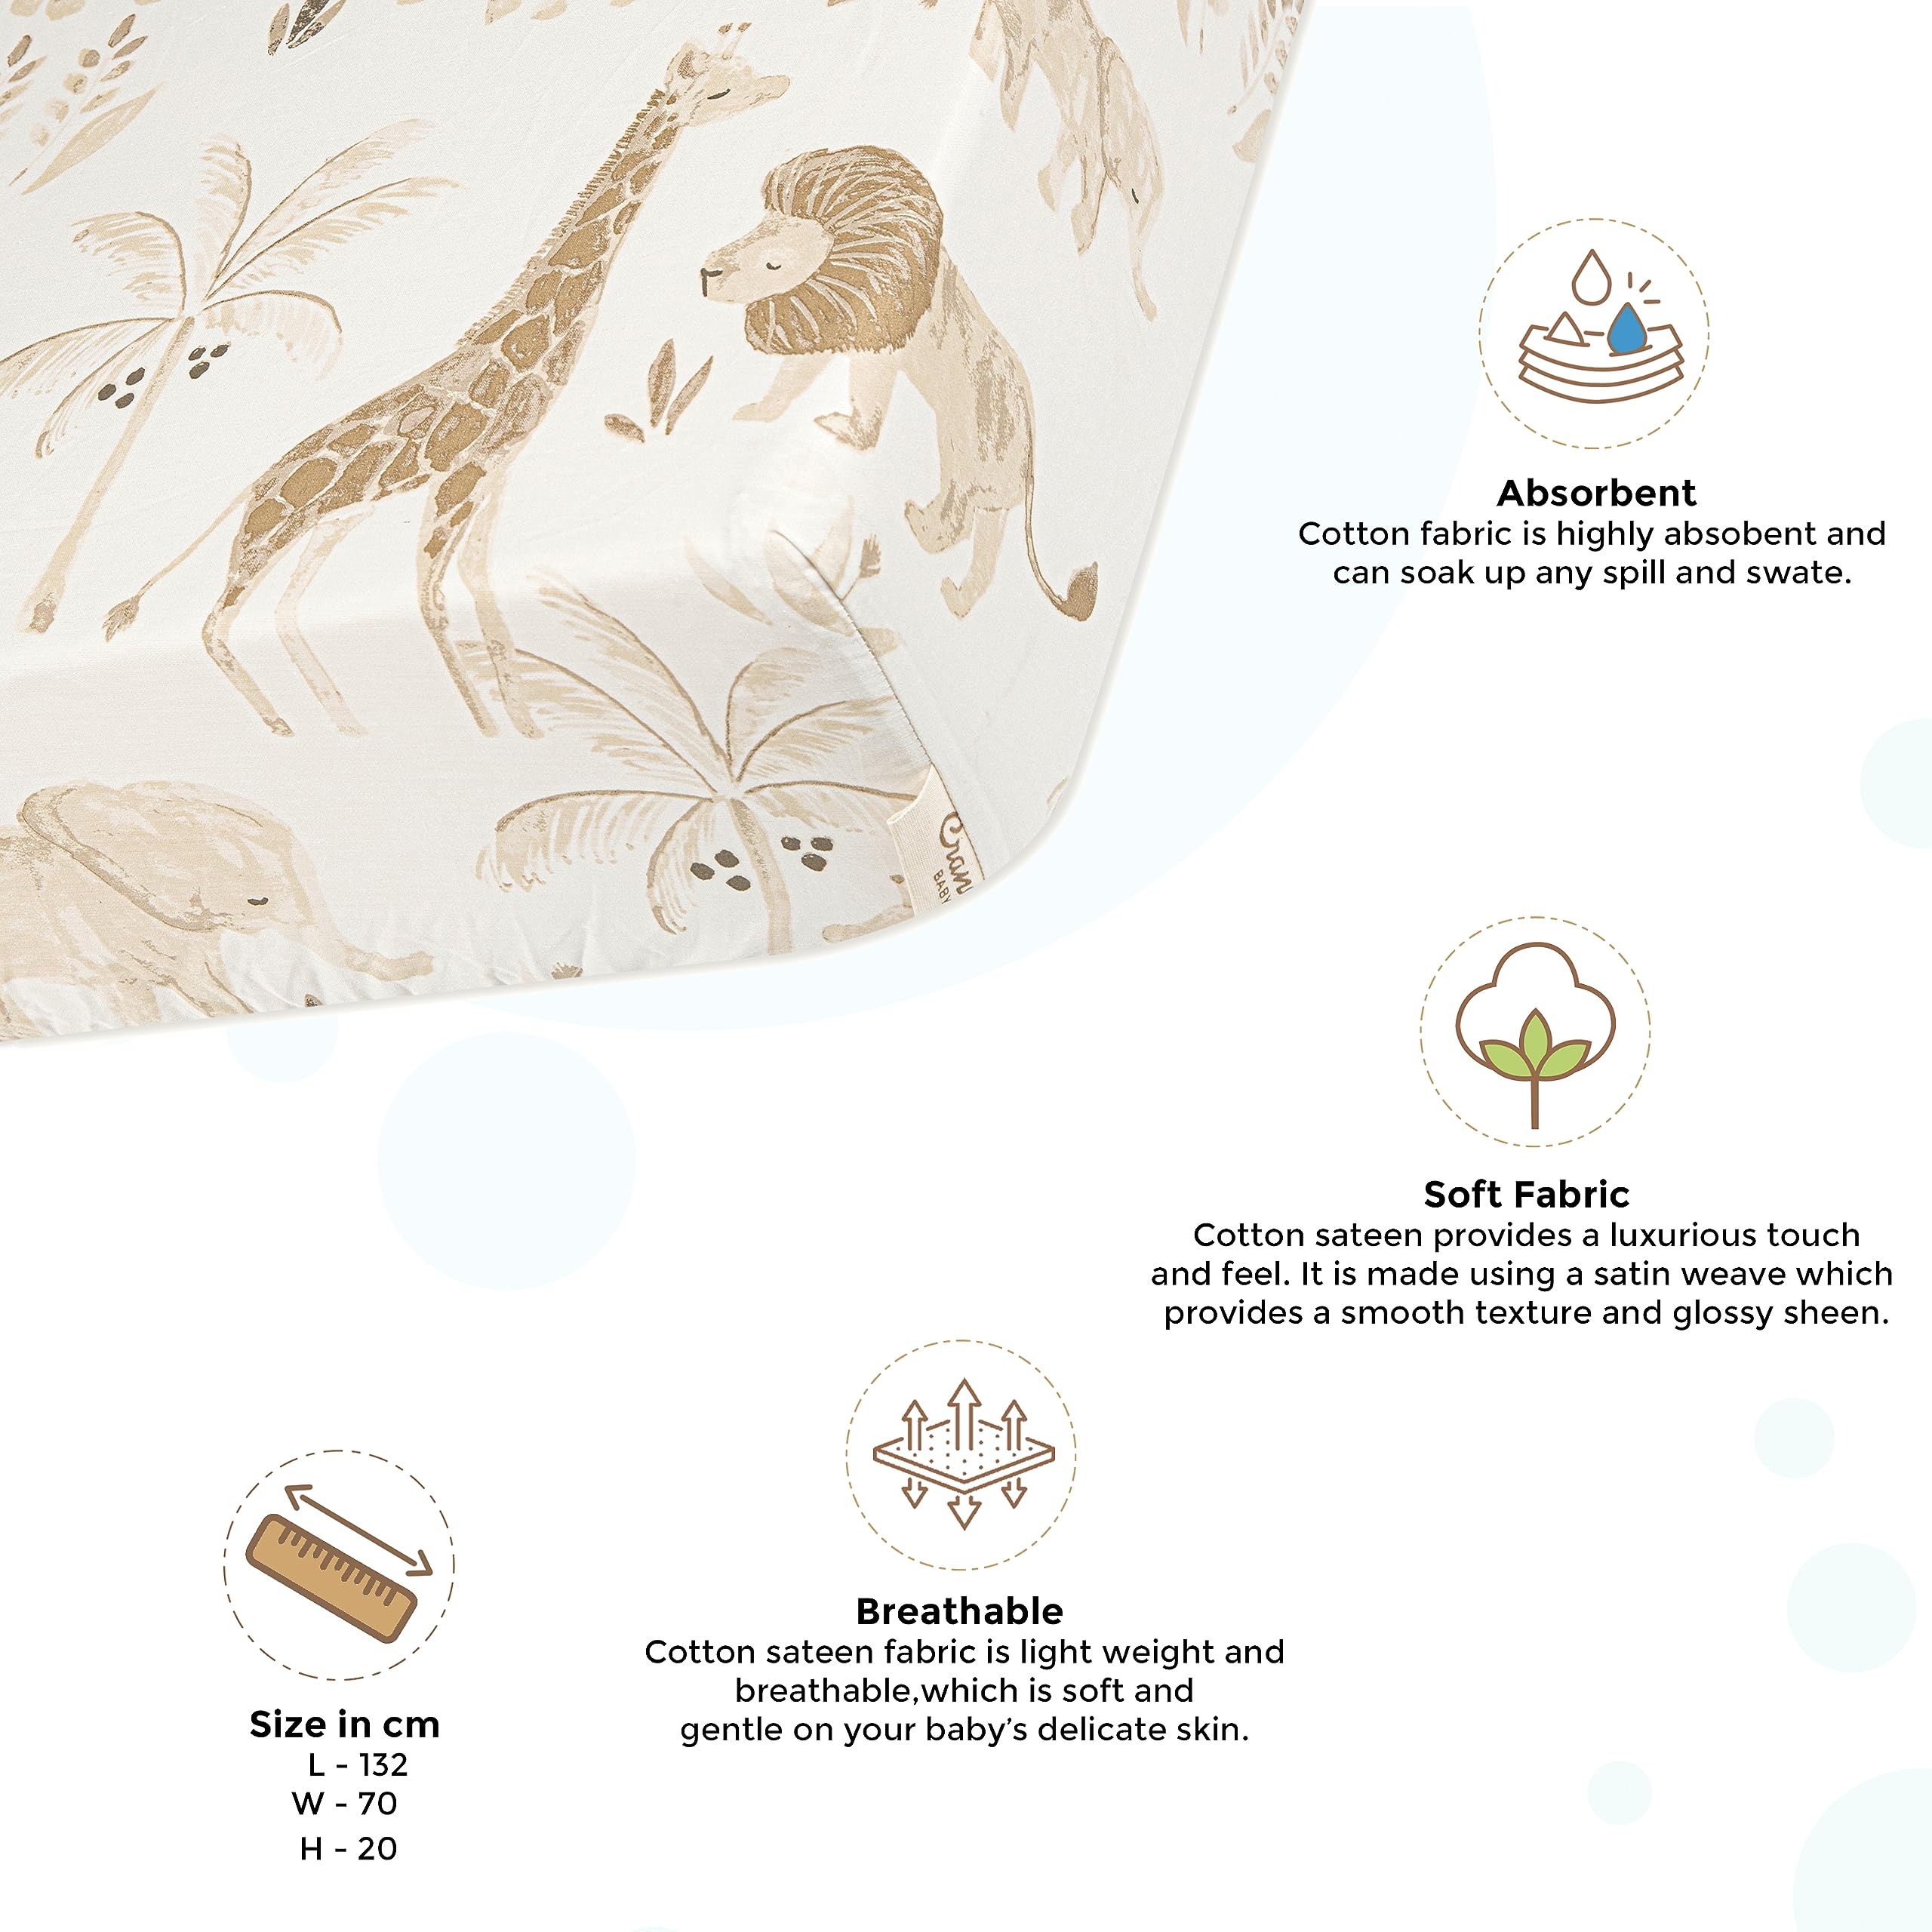 Crane Baby Soft Cotton Crib Mattress Sheet, Fitted Sheet for Cribs and Toddler Beds, Safari Animal, 28”w x 52”h x 9”d